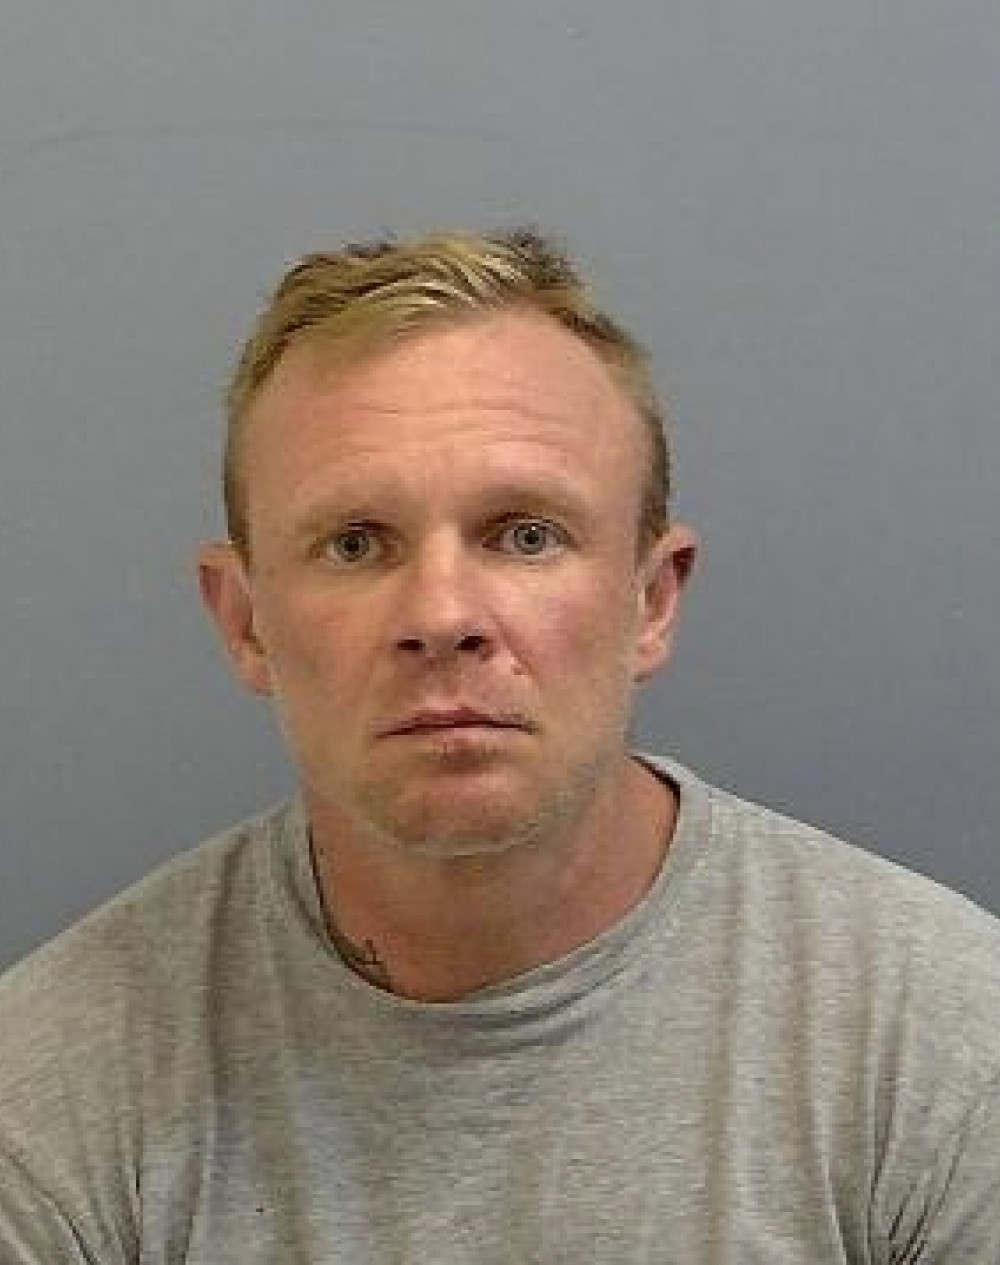 Lukasz Stachura jailed for life for murder at Luton Crown Court